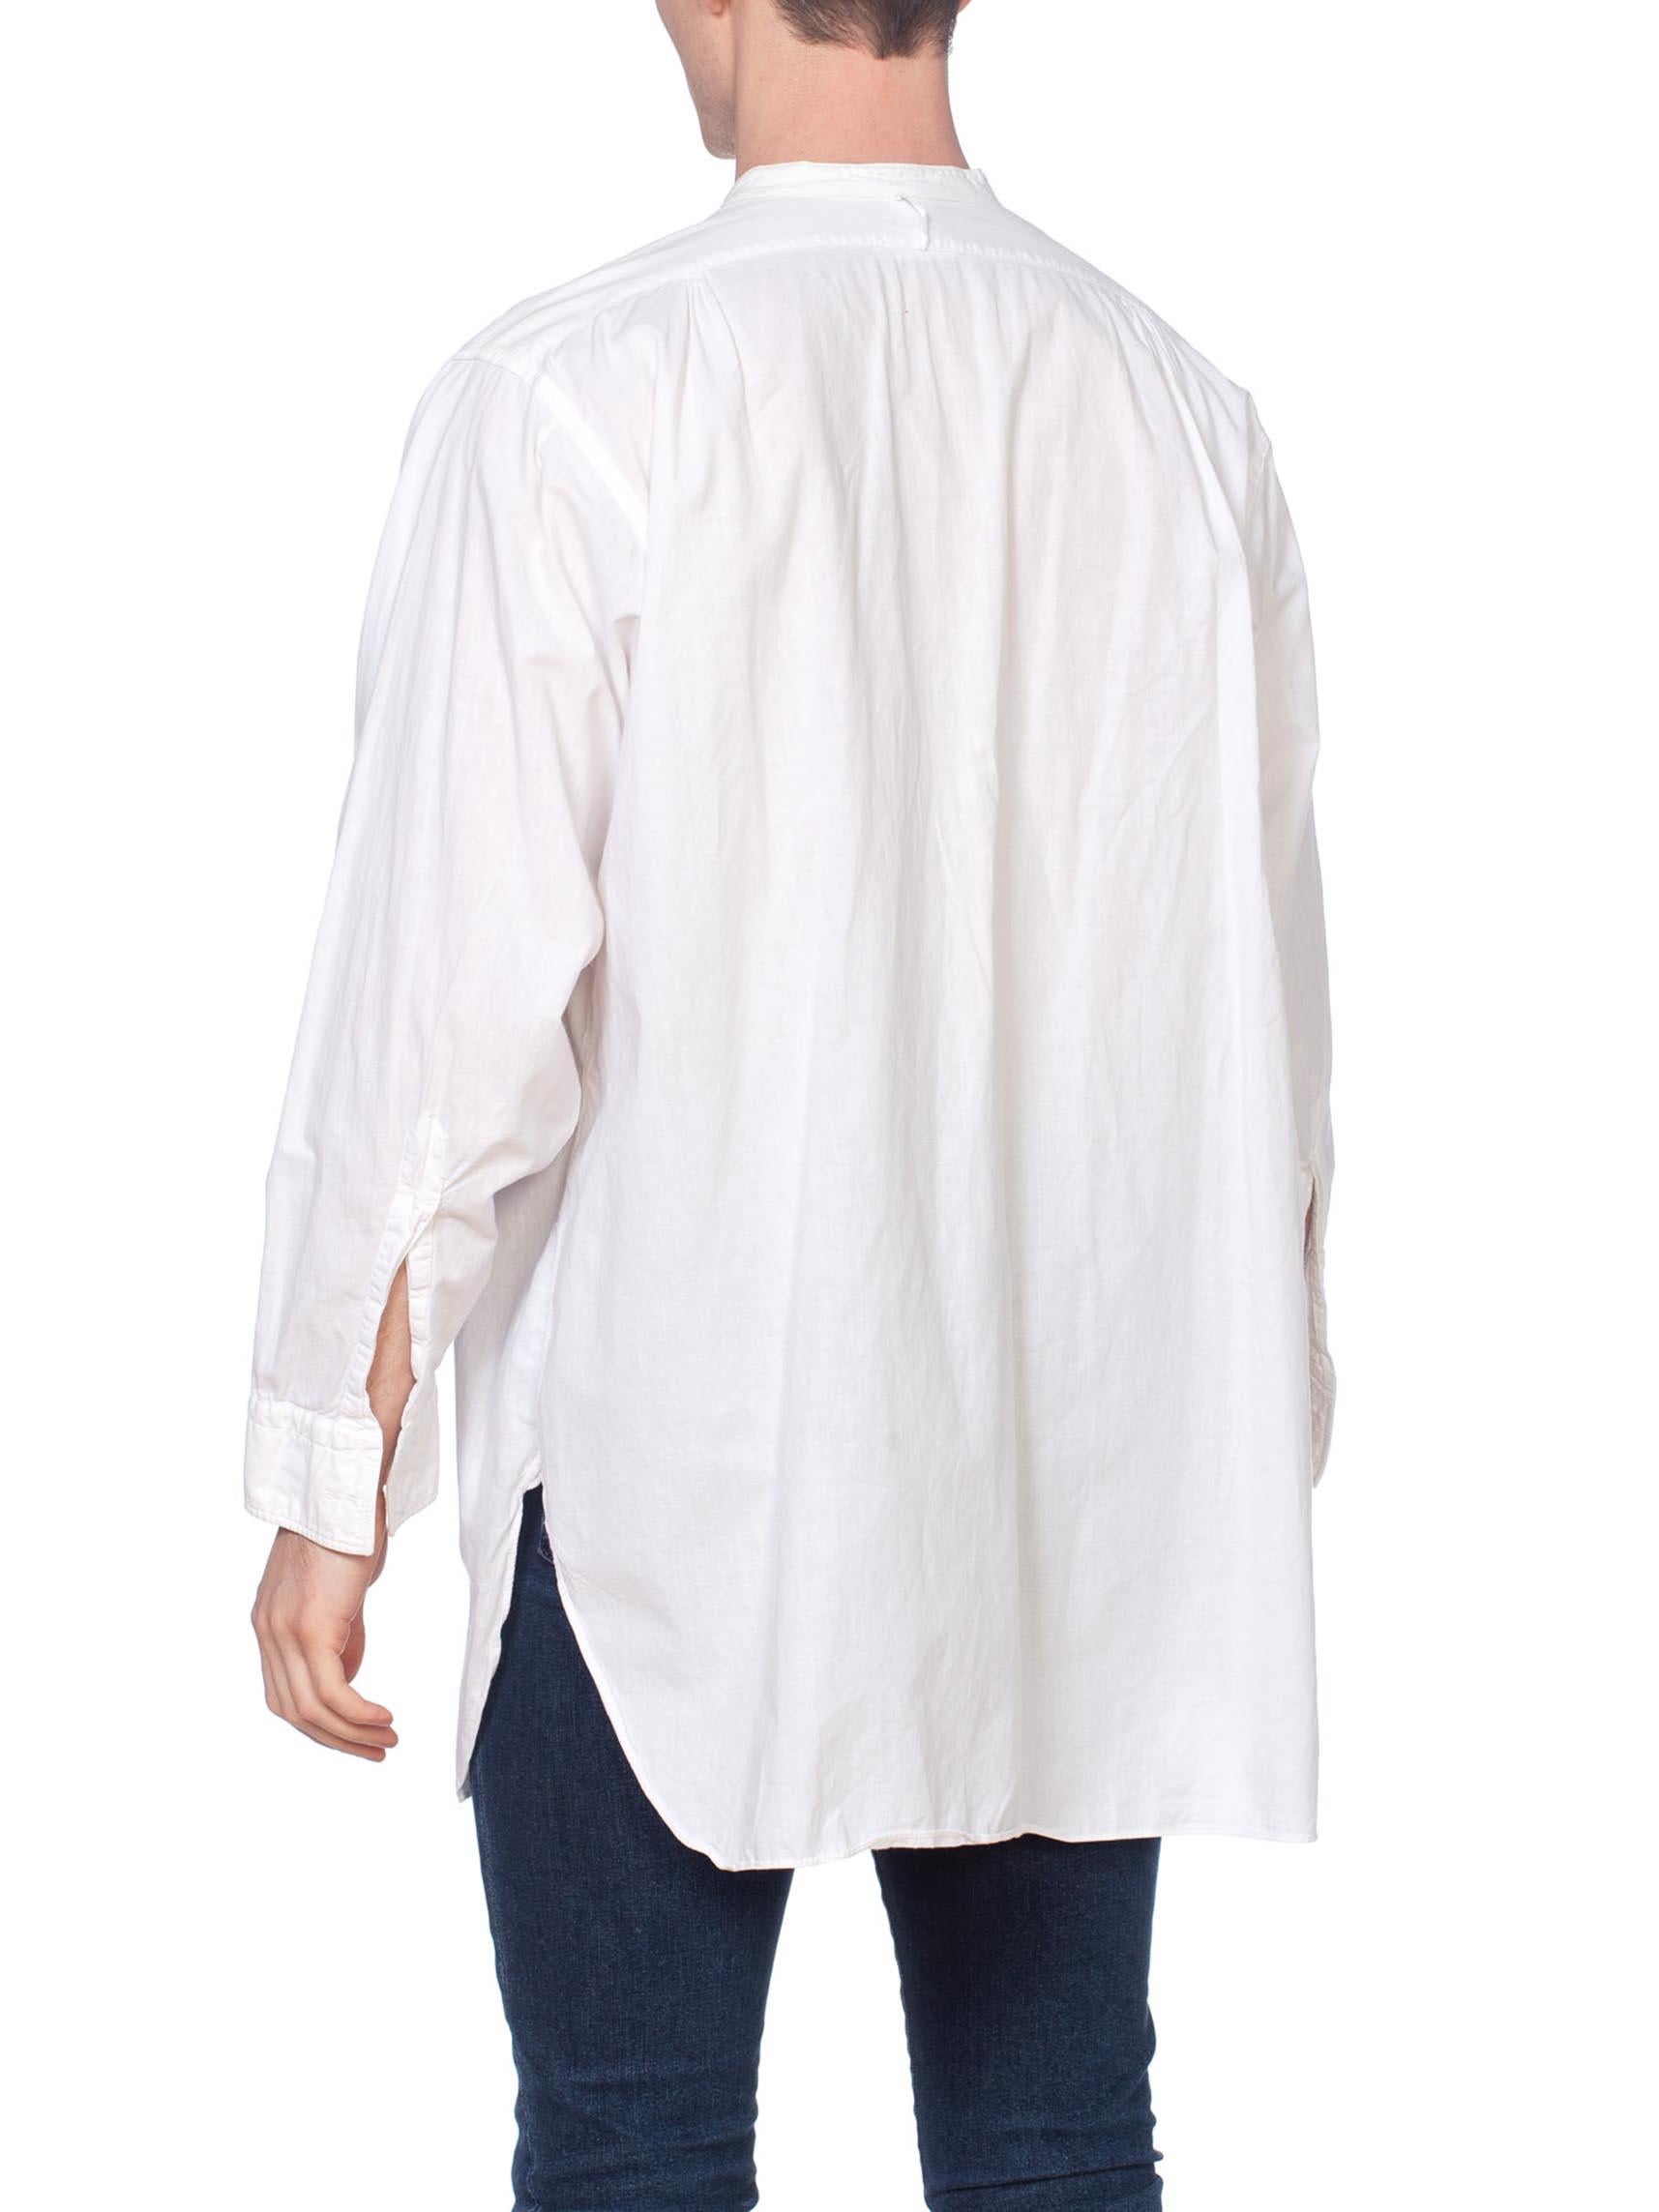 1900S White Cotton Men's Formal Bib Front Shirt By Arrow In Excellent Condition For Sale In New York, NY